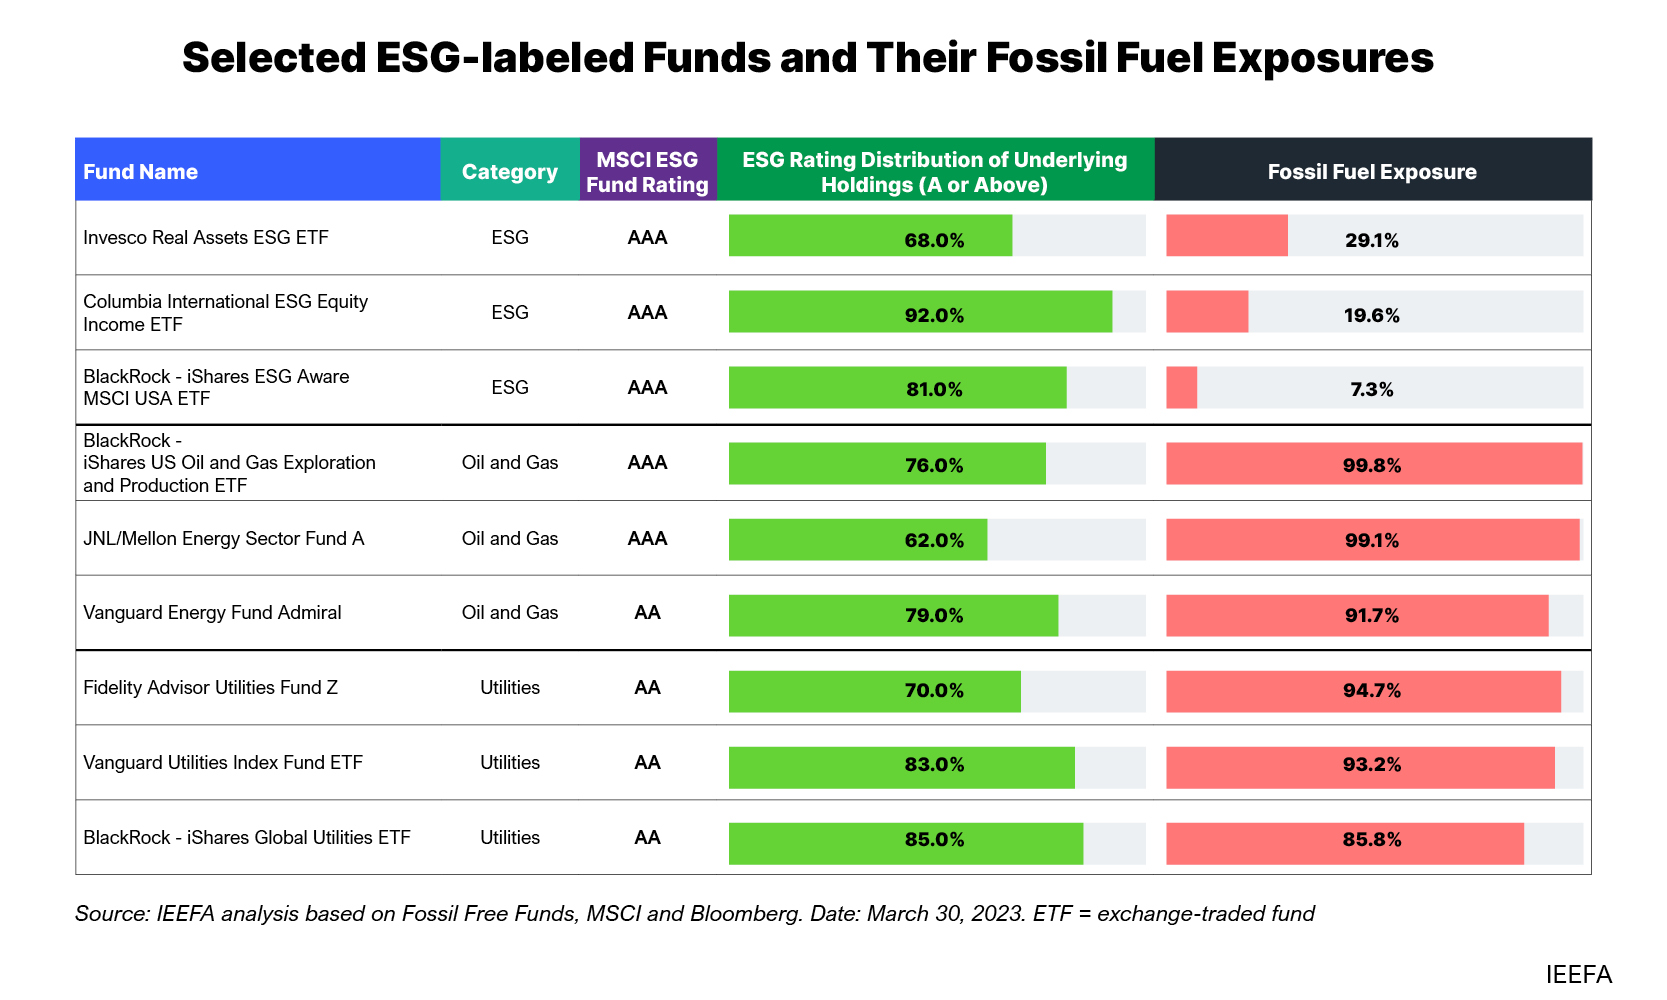 Selected ESG-labeled funds